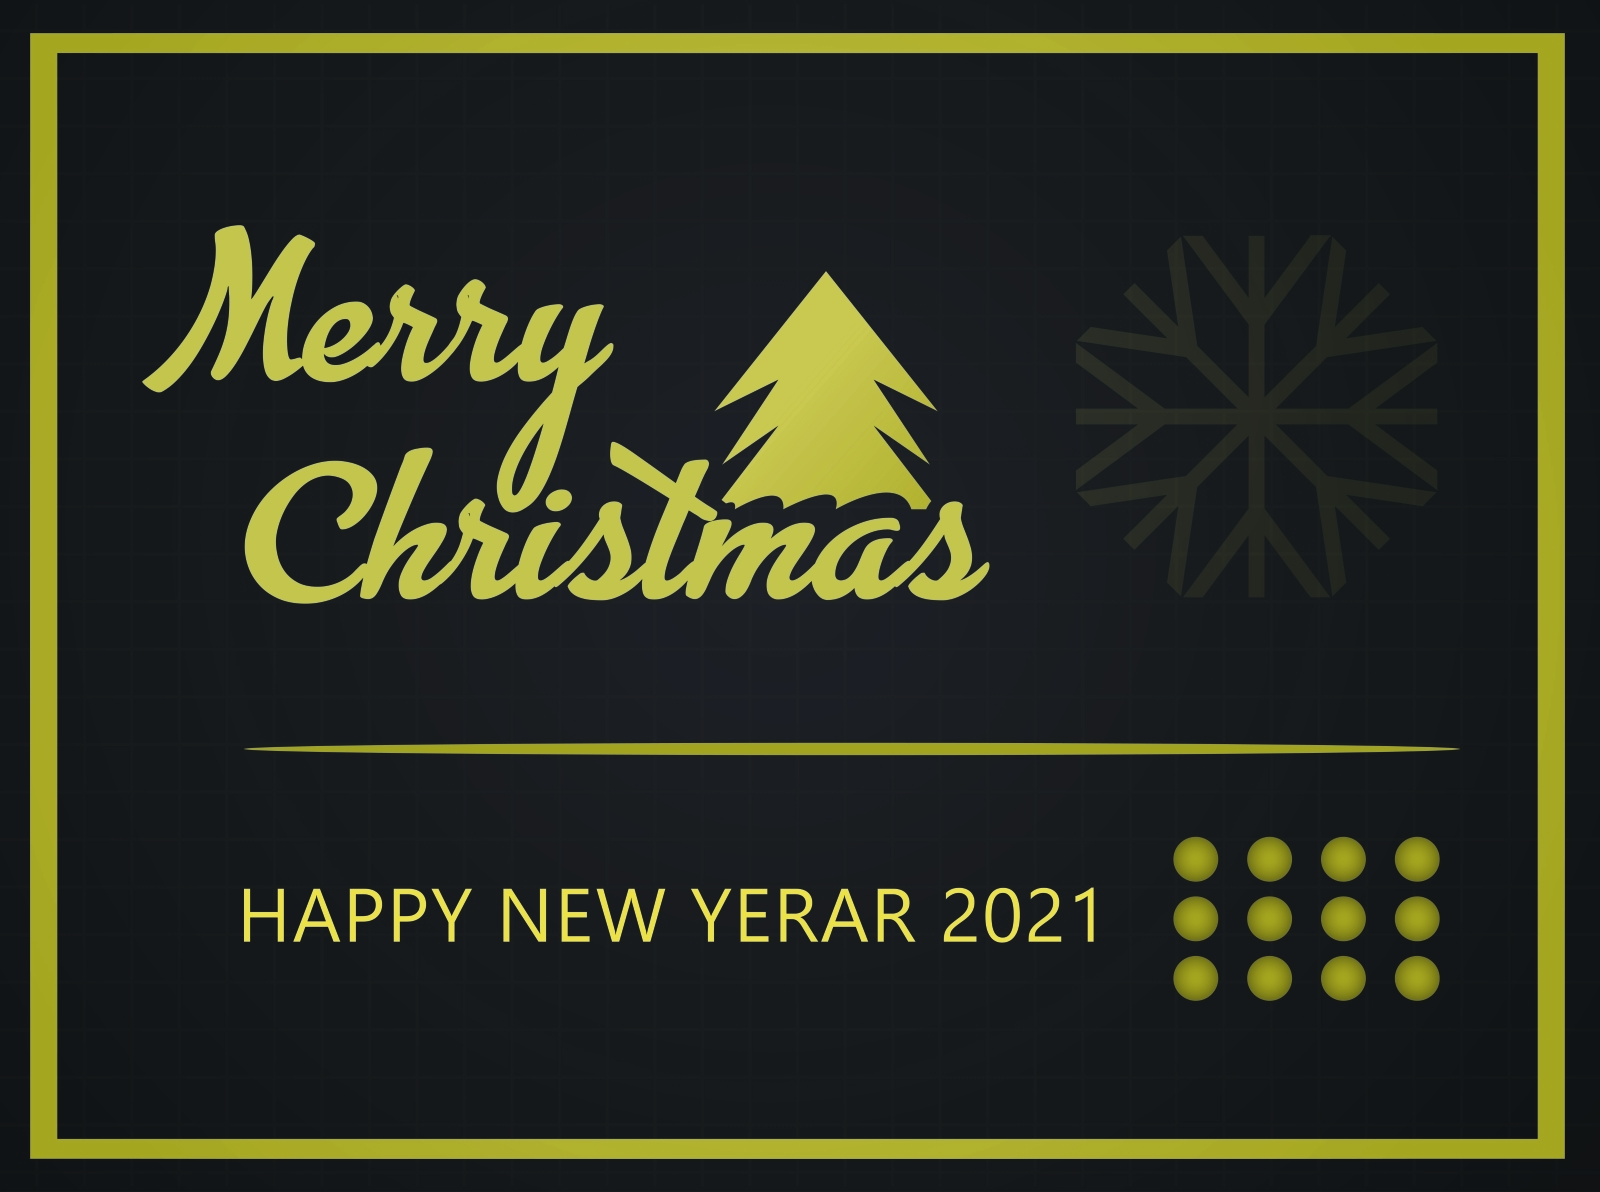 Merry Christmas And Happy New Year 2021 Background Design by Alamin Hossen  on Dribbble